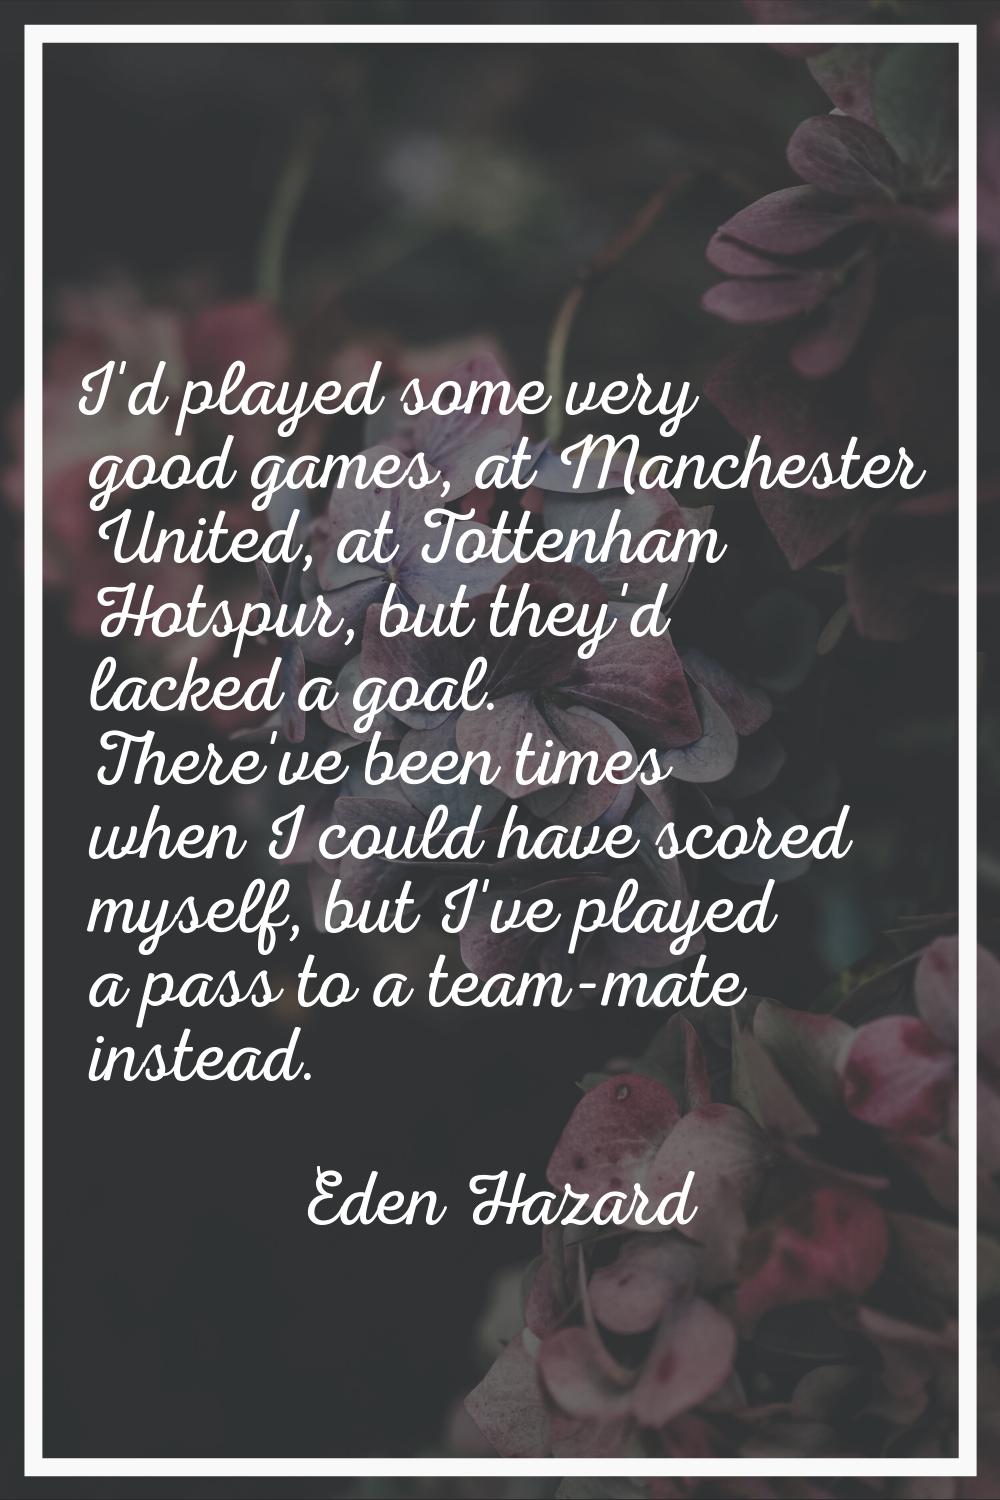 I'd played some very good games, at Manchester United, at Tottenham Hotspur, but they'd lacked a go